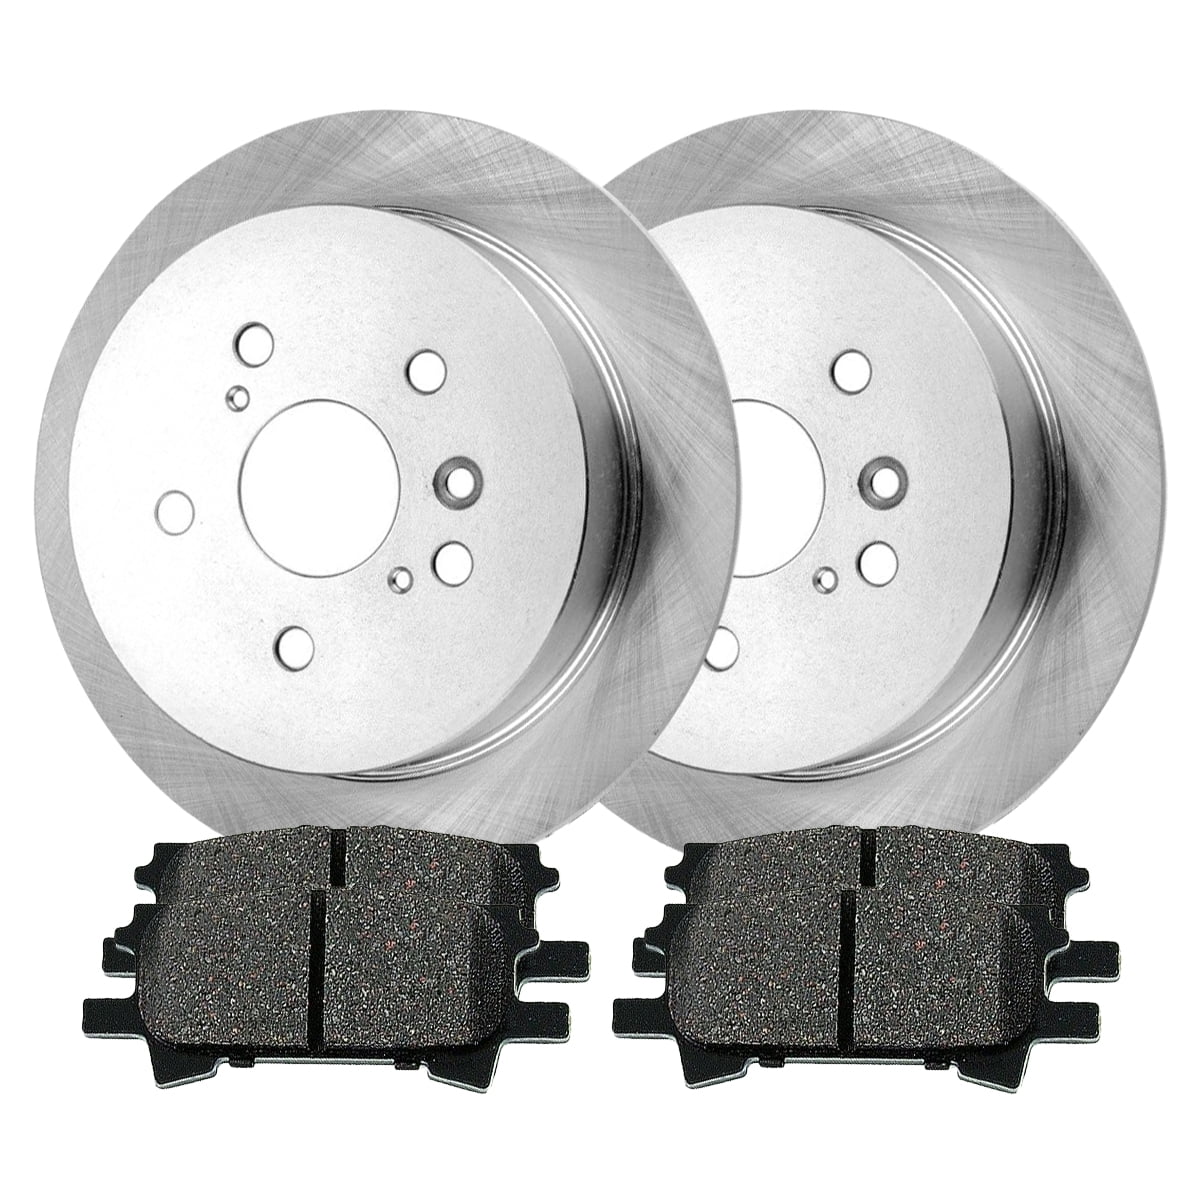 ECCPP 2pcs Front Brake Rotors and 4pcs Ceramic Disc Brake Pads Fit for 2004-2006 for Lexus RX330 2006-2007 for Toyota Highlander 2006-2008 for Lexus RX400h 2007-2009 for Lexus RX350 